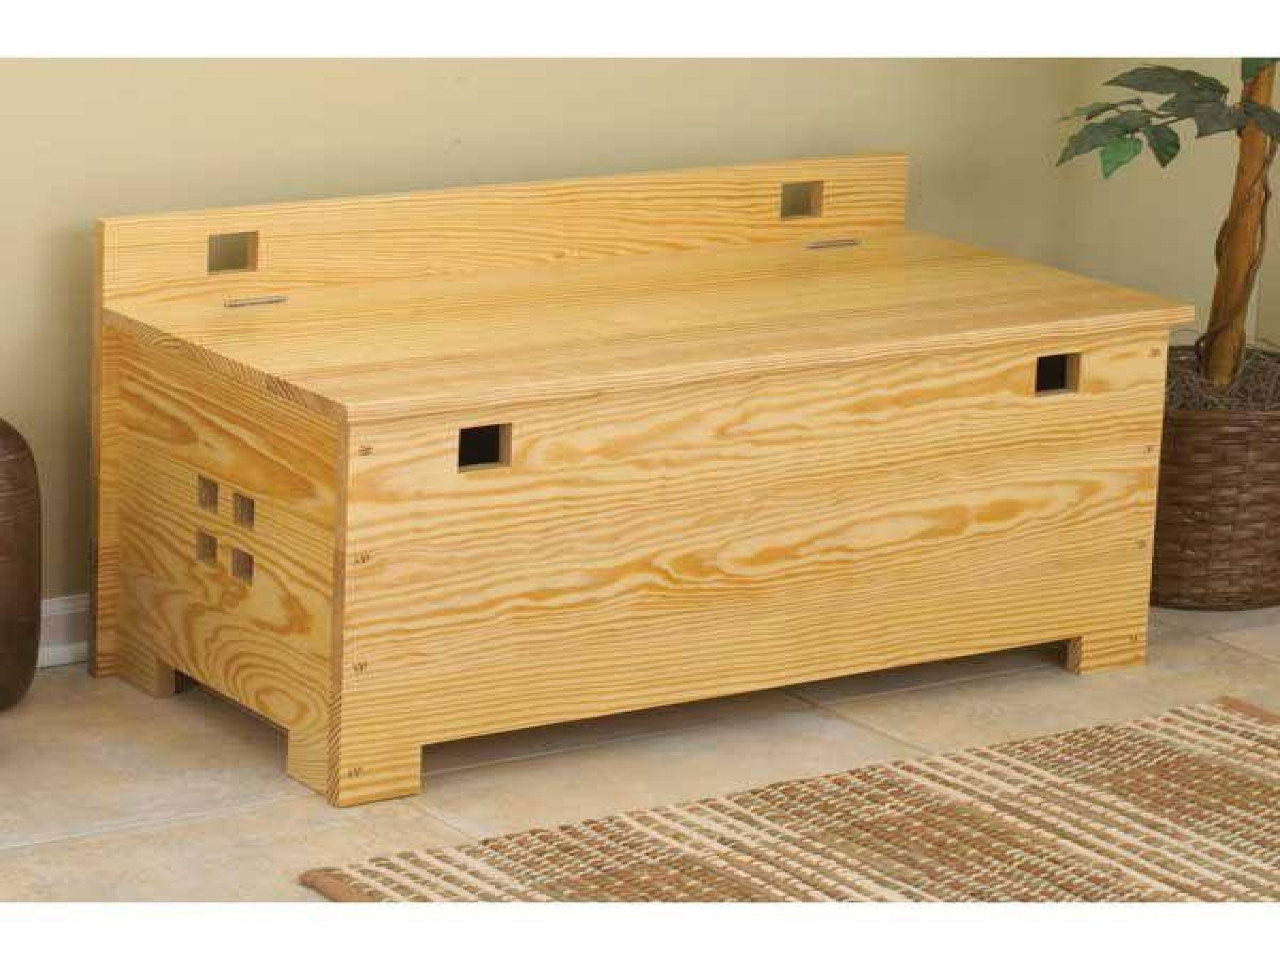 Wooden Bench With Storage Plans
 Outdoor Storage Bench Wood Storage Bench Project Plans